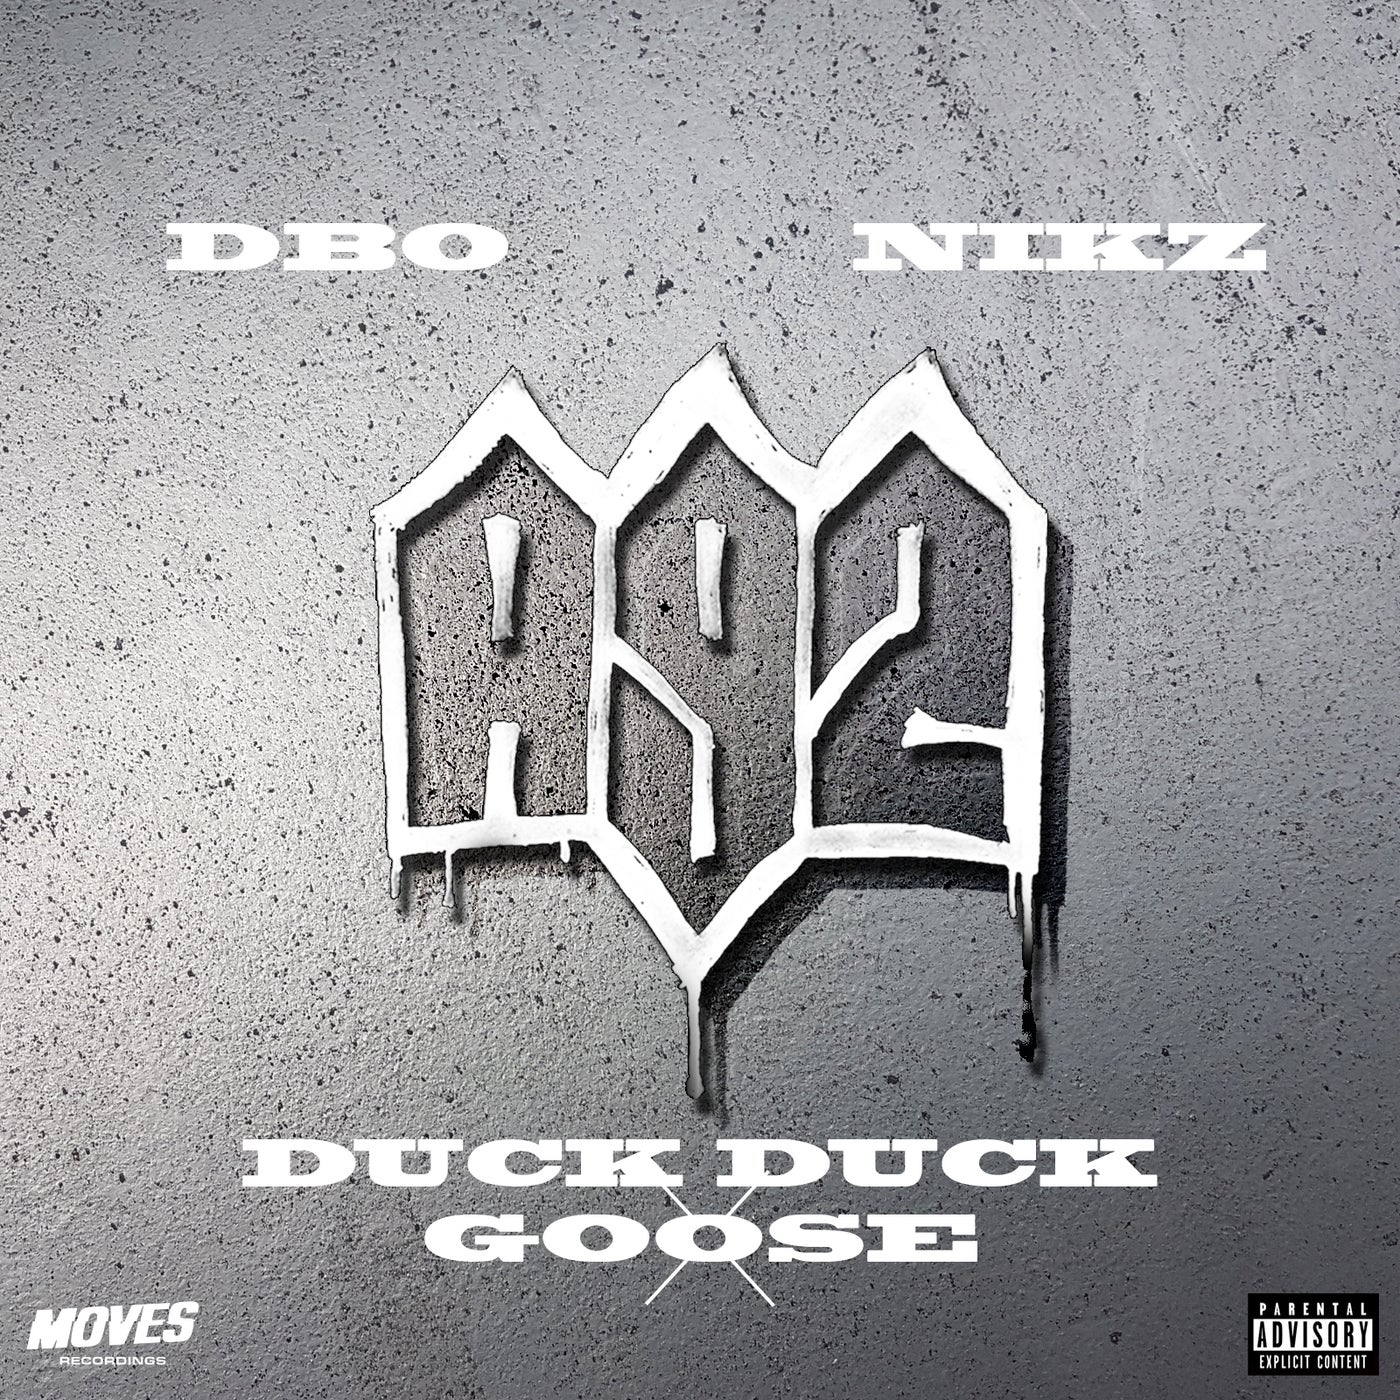 Duck Duck Goose by A92, A9Nikz and A9Dbo Fundz on Beatsource